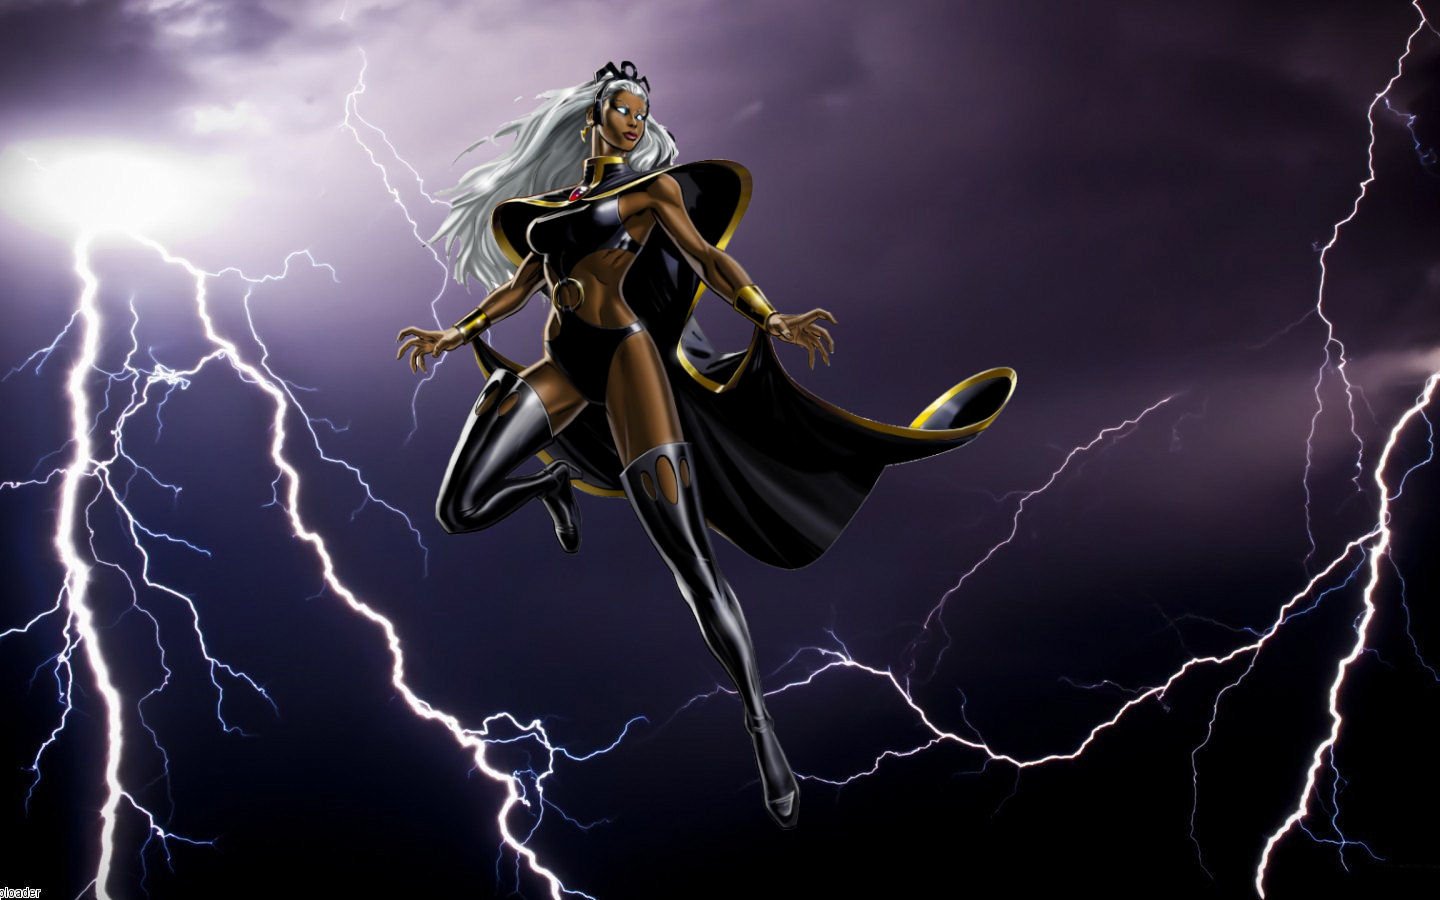 Marvel Storm Wallpapers